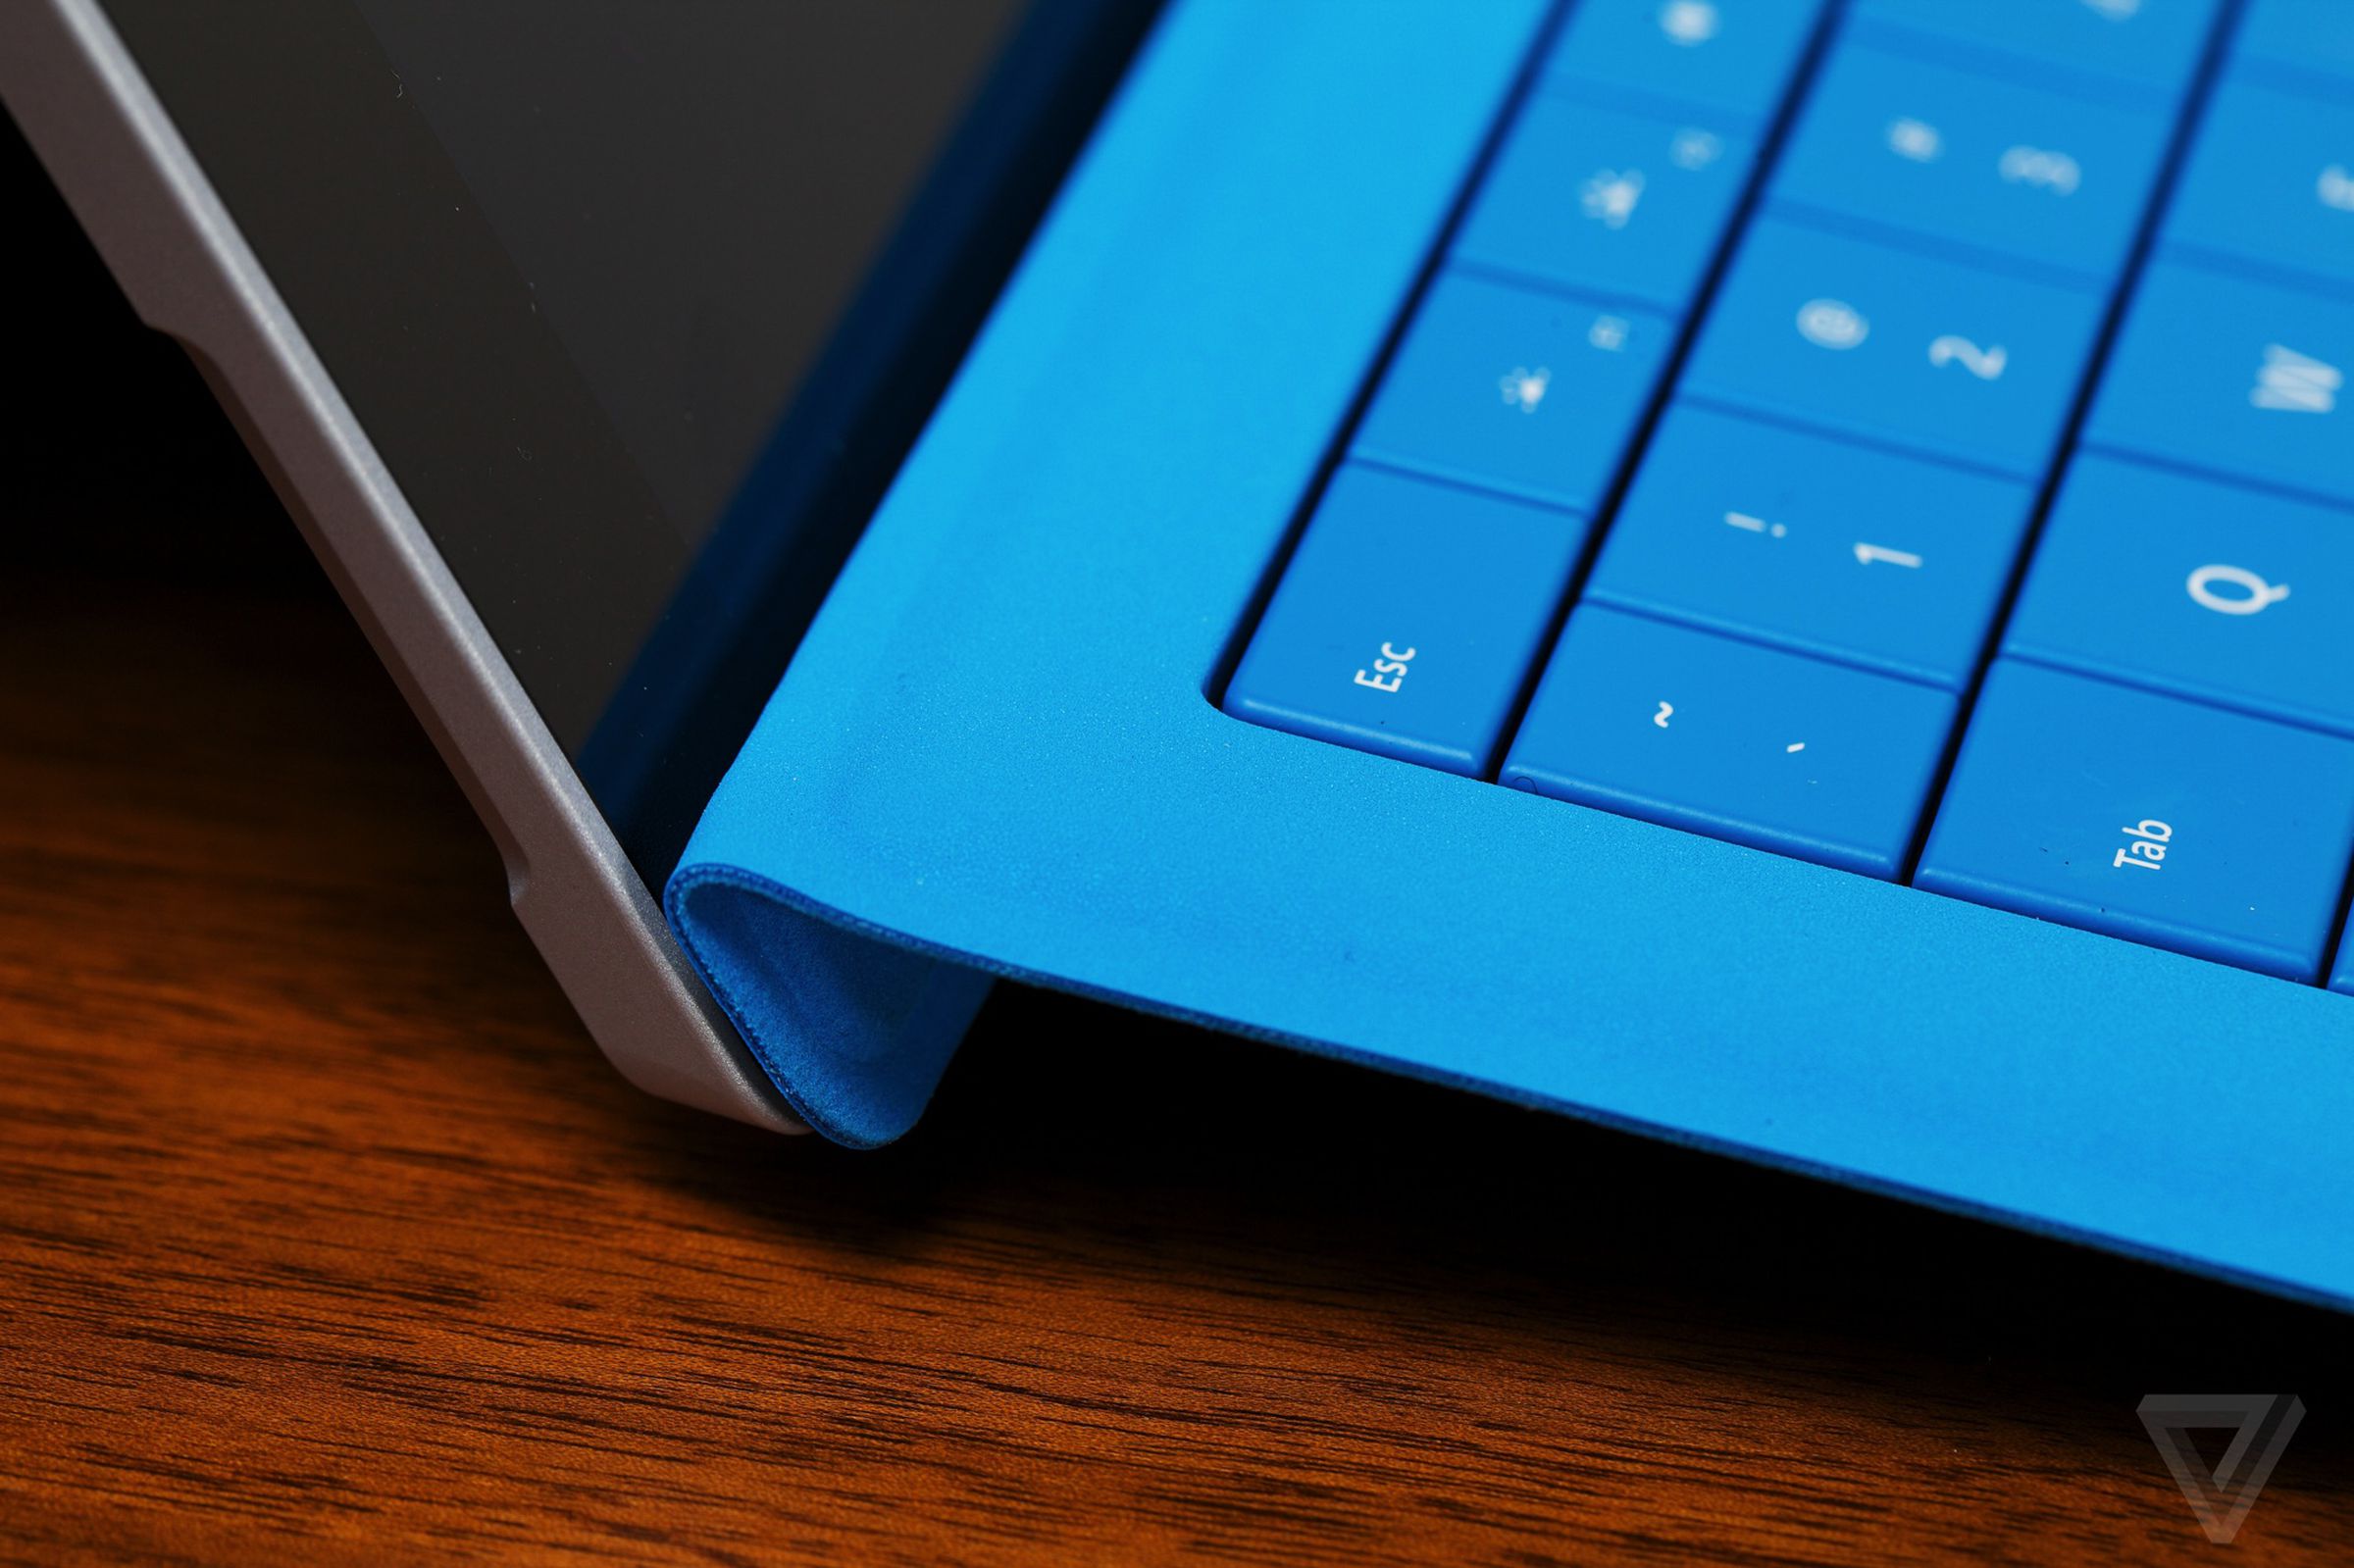 The all new Microsoft Surface Pro 3 in photos